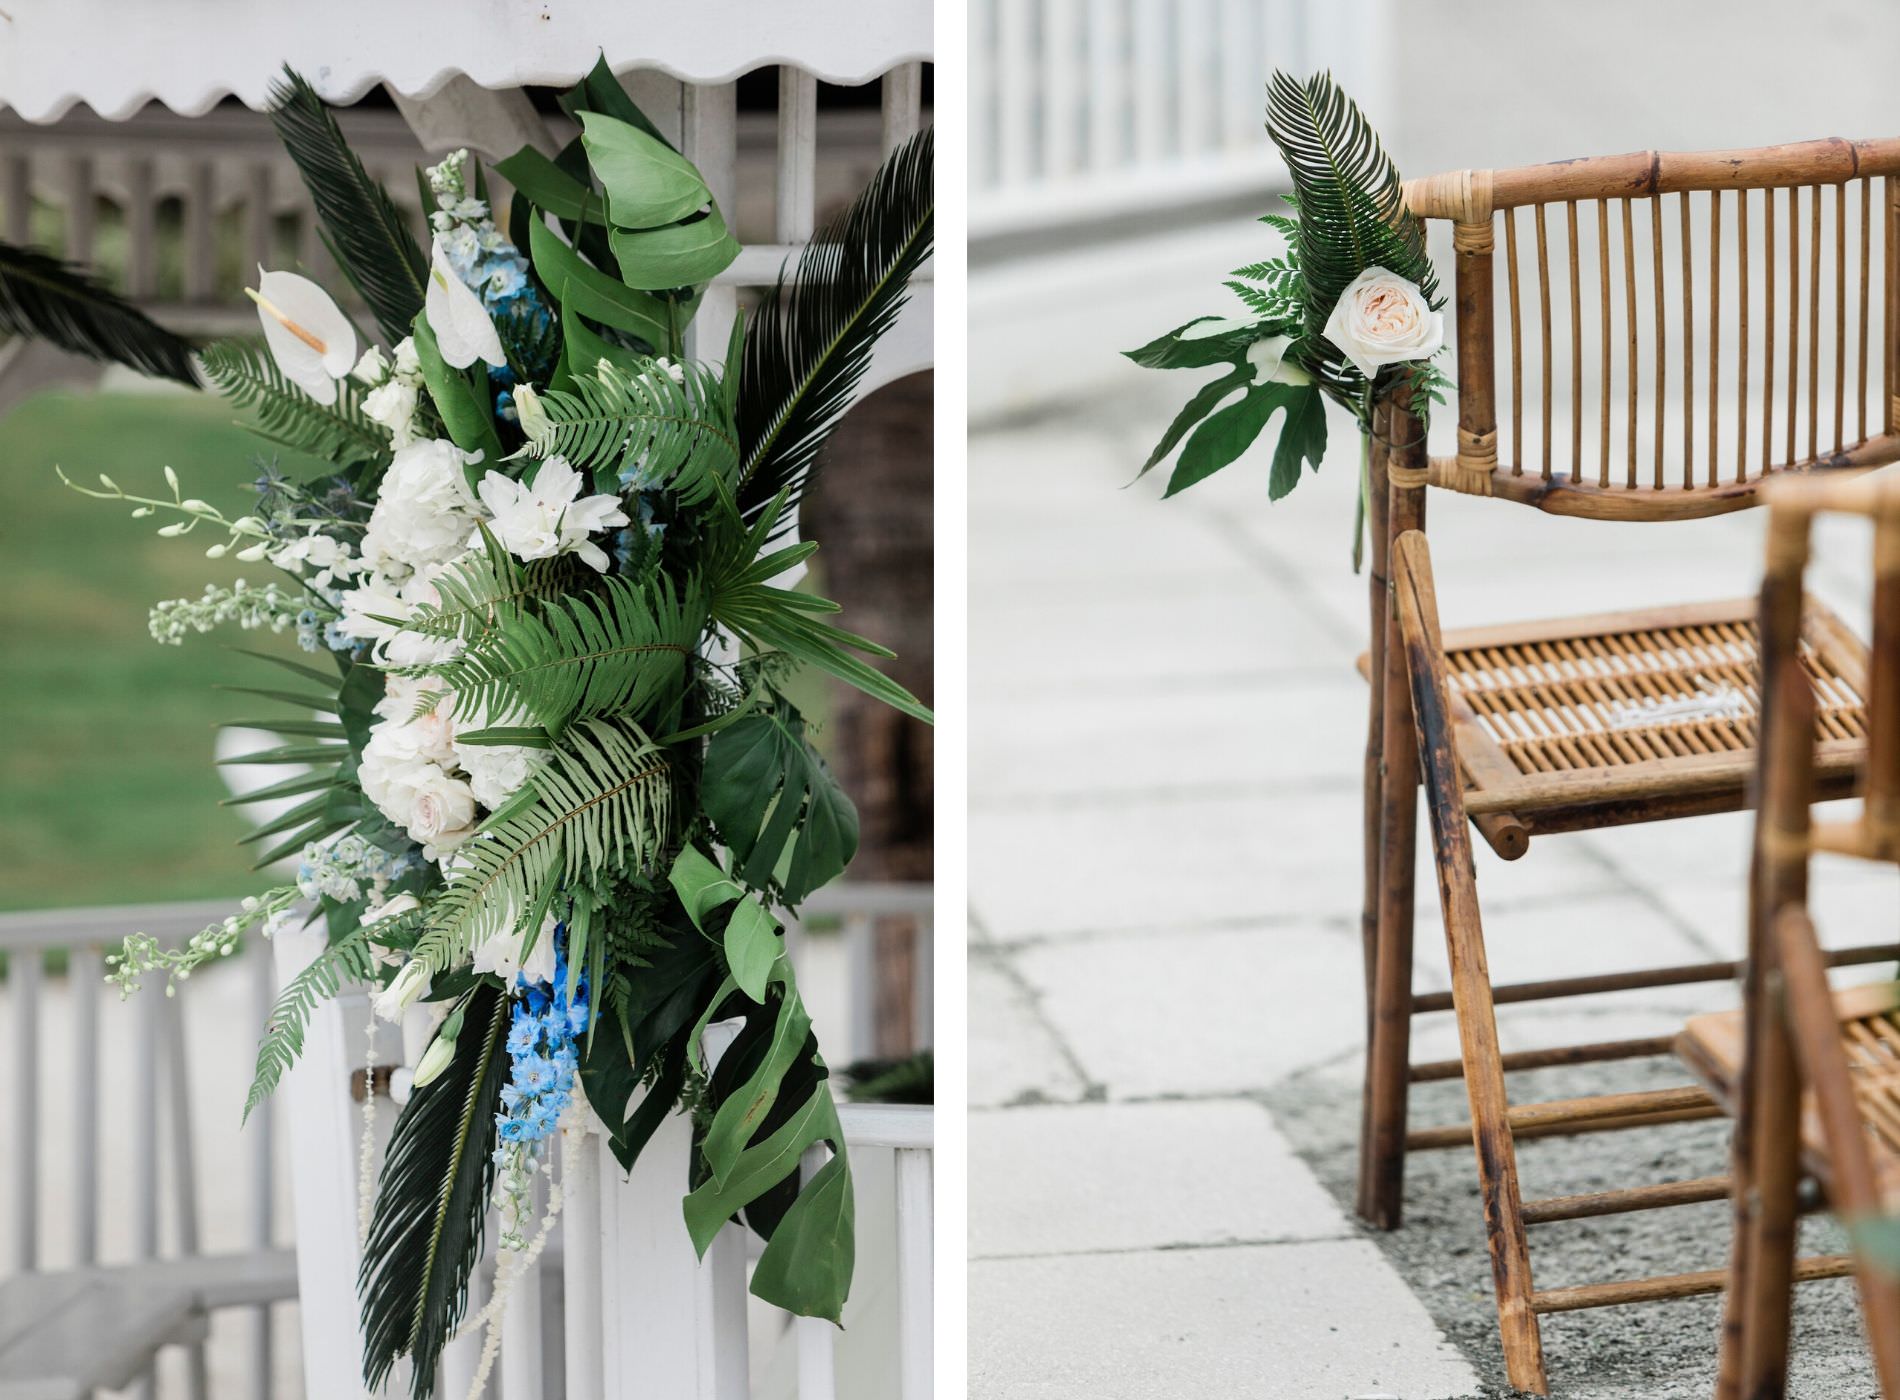 Tropical White and Green Wedding Ceremony Floral Arrangements with Palms, Greenery, Ferns, Hydrangea, Blue Hyacinth | Tropical Wedding Bamboo Folding Chairs